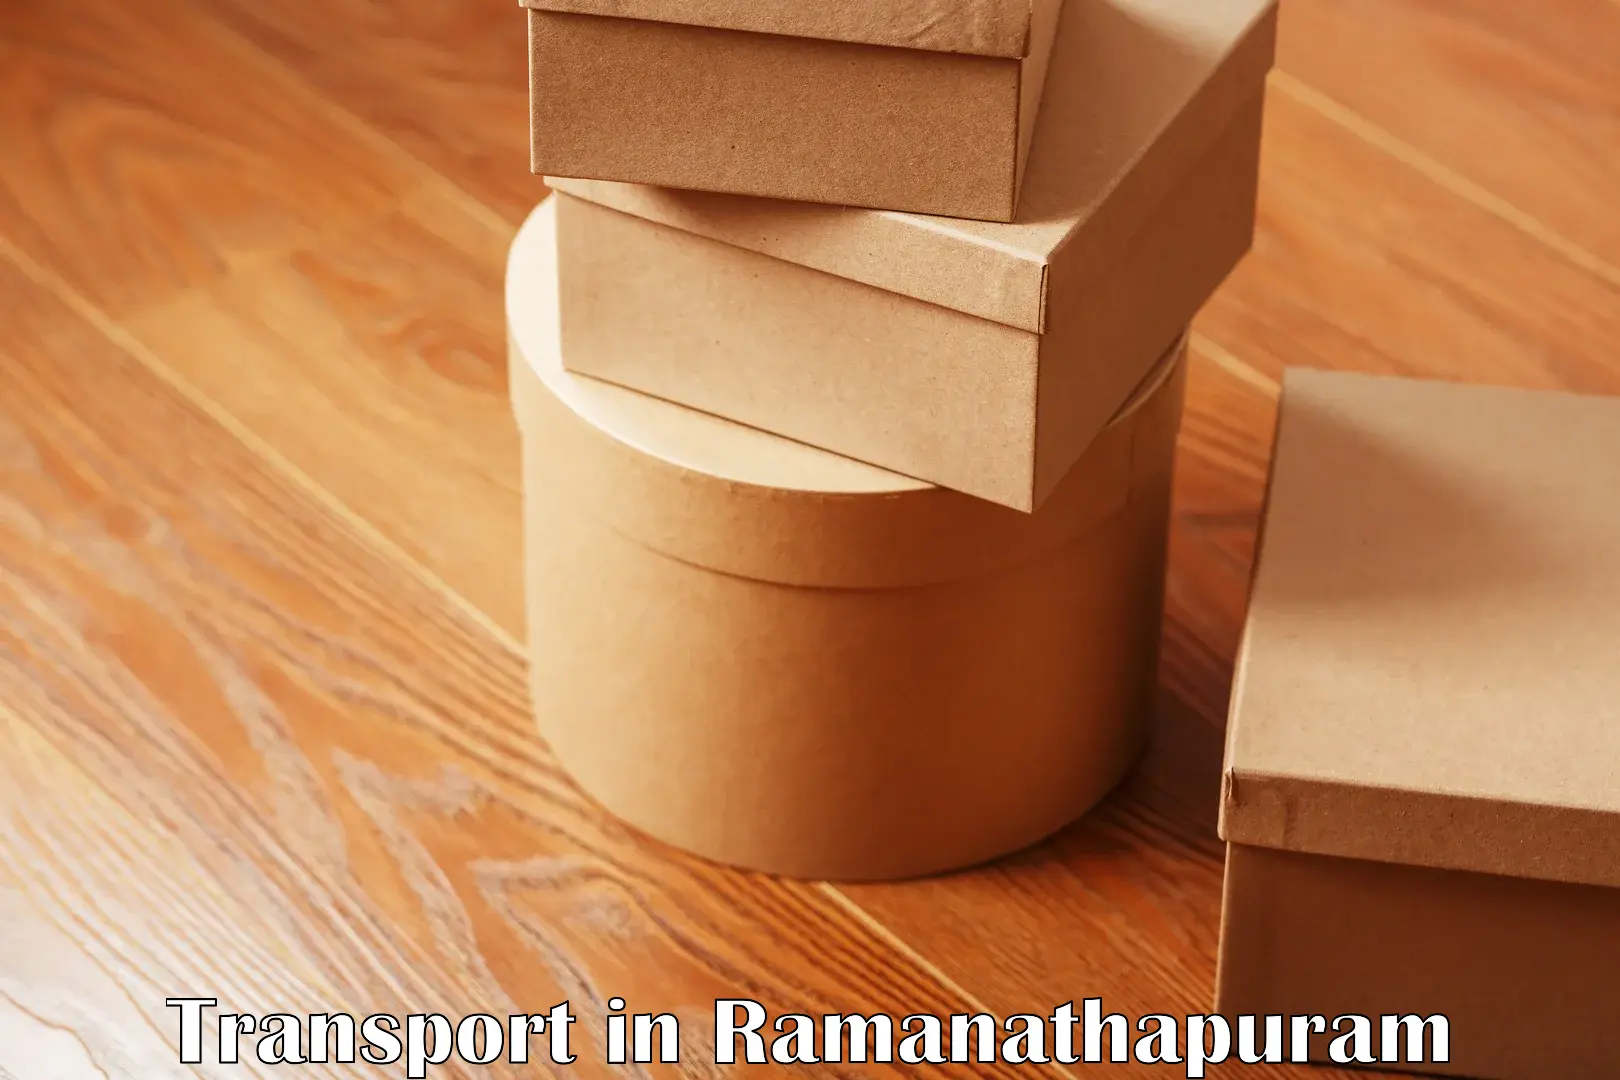 Container transportation services in Ramanathapuram